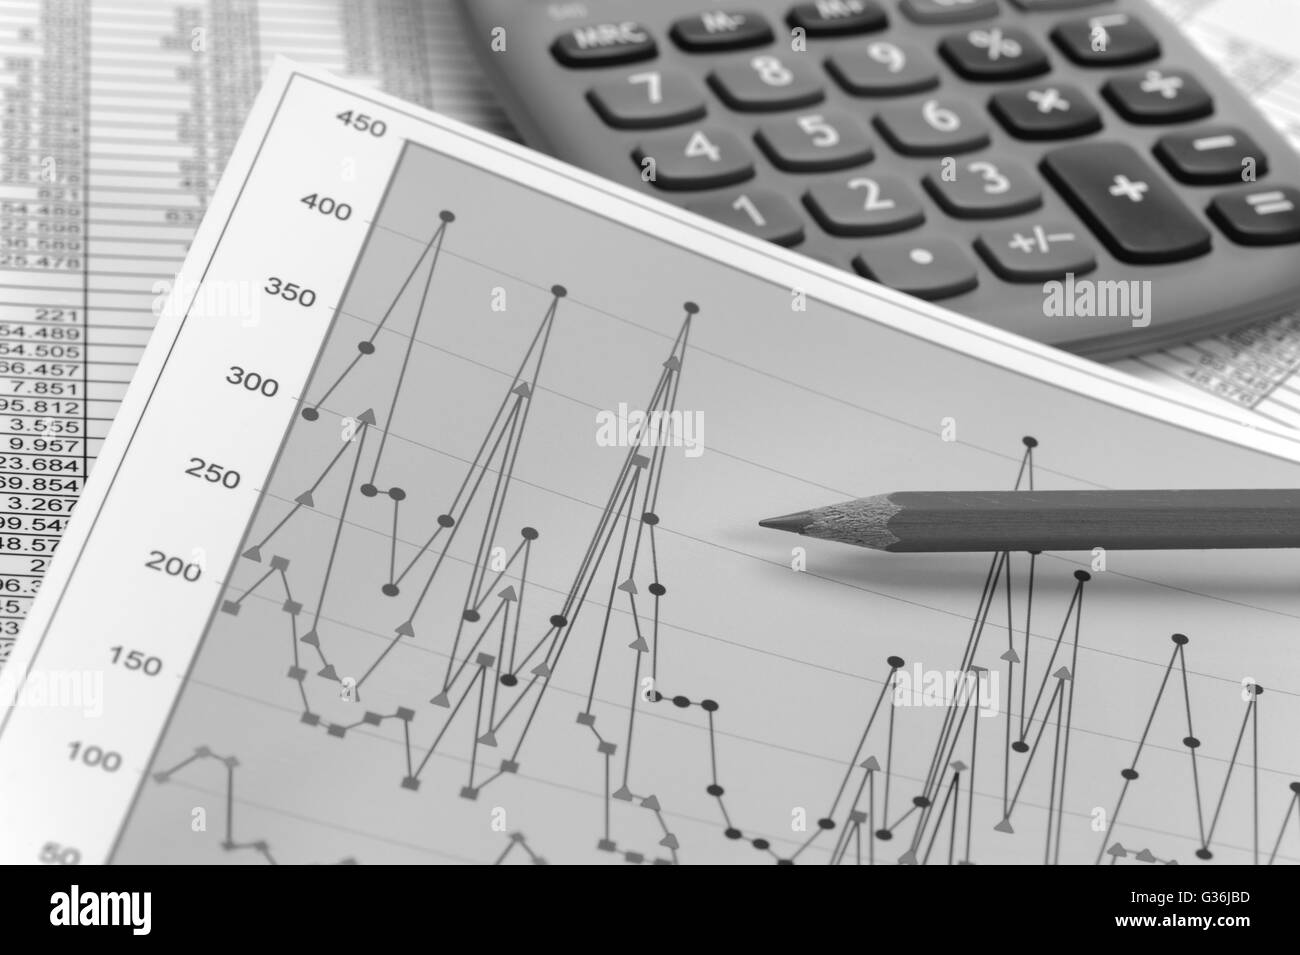 chart of financial budget calculation Stock Photo